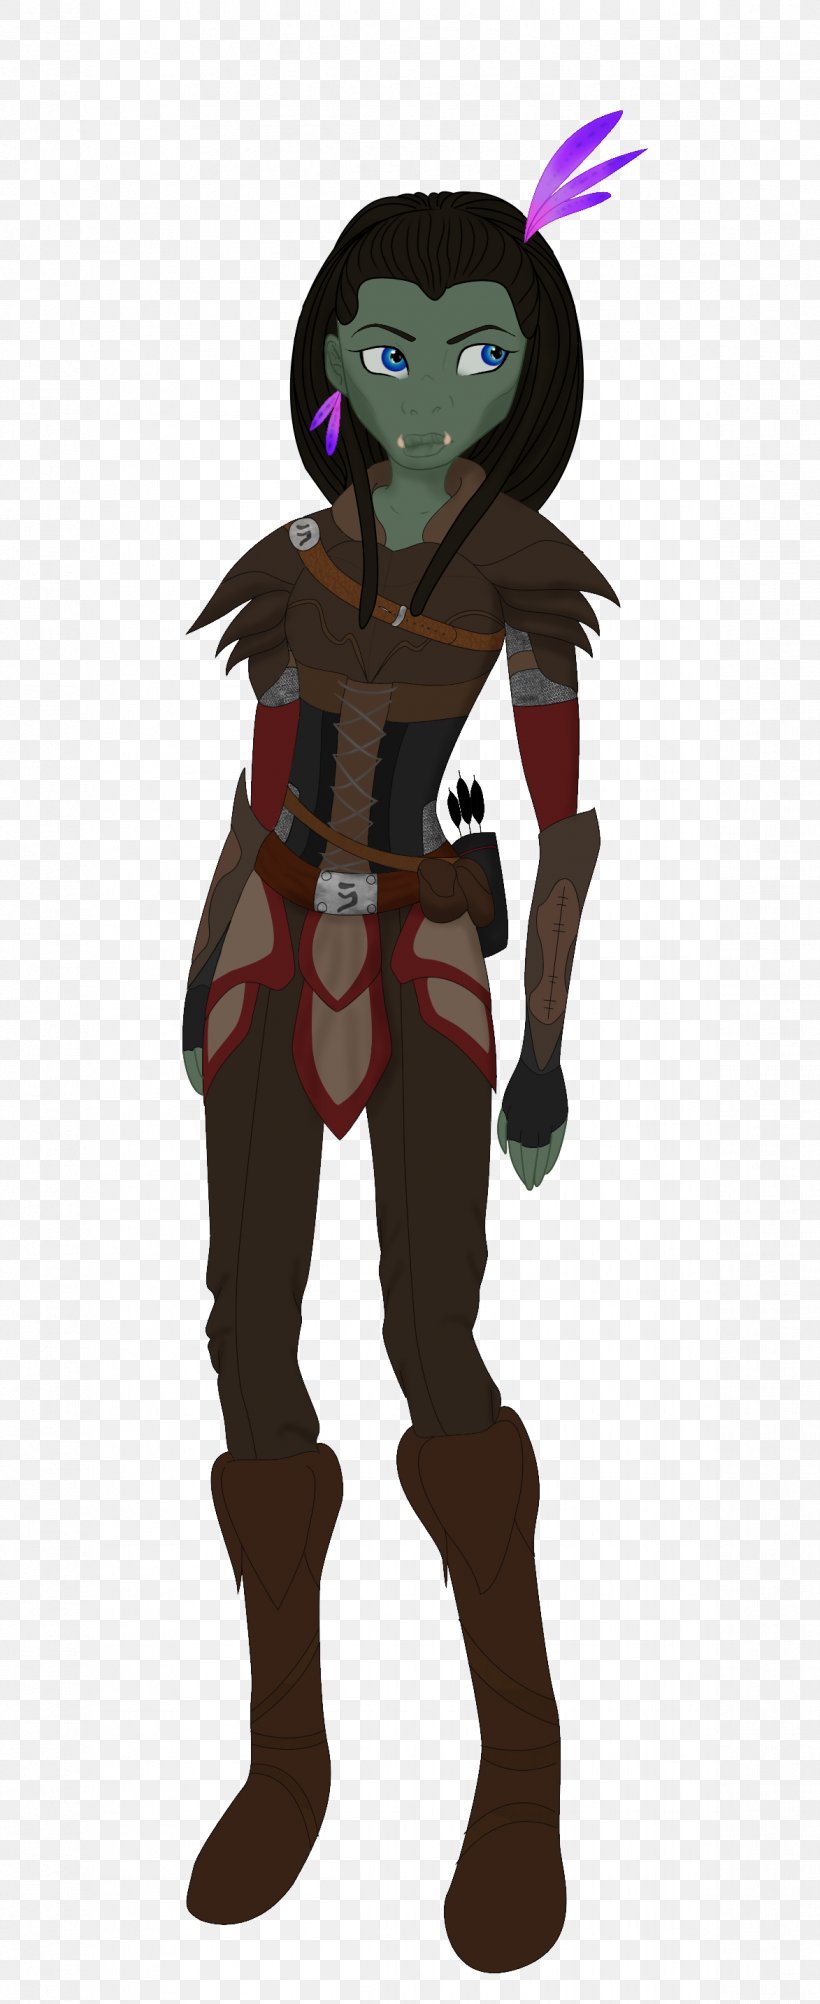 Dungeons & Dragons Half-orc Player Character Halfling, PNG, 1173x2868px, Dungeons Dragons, Art, Character, Costume Design, Drawing Download Free